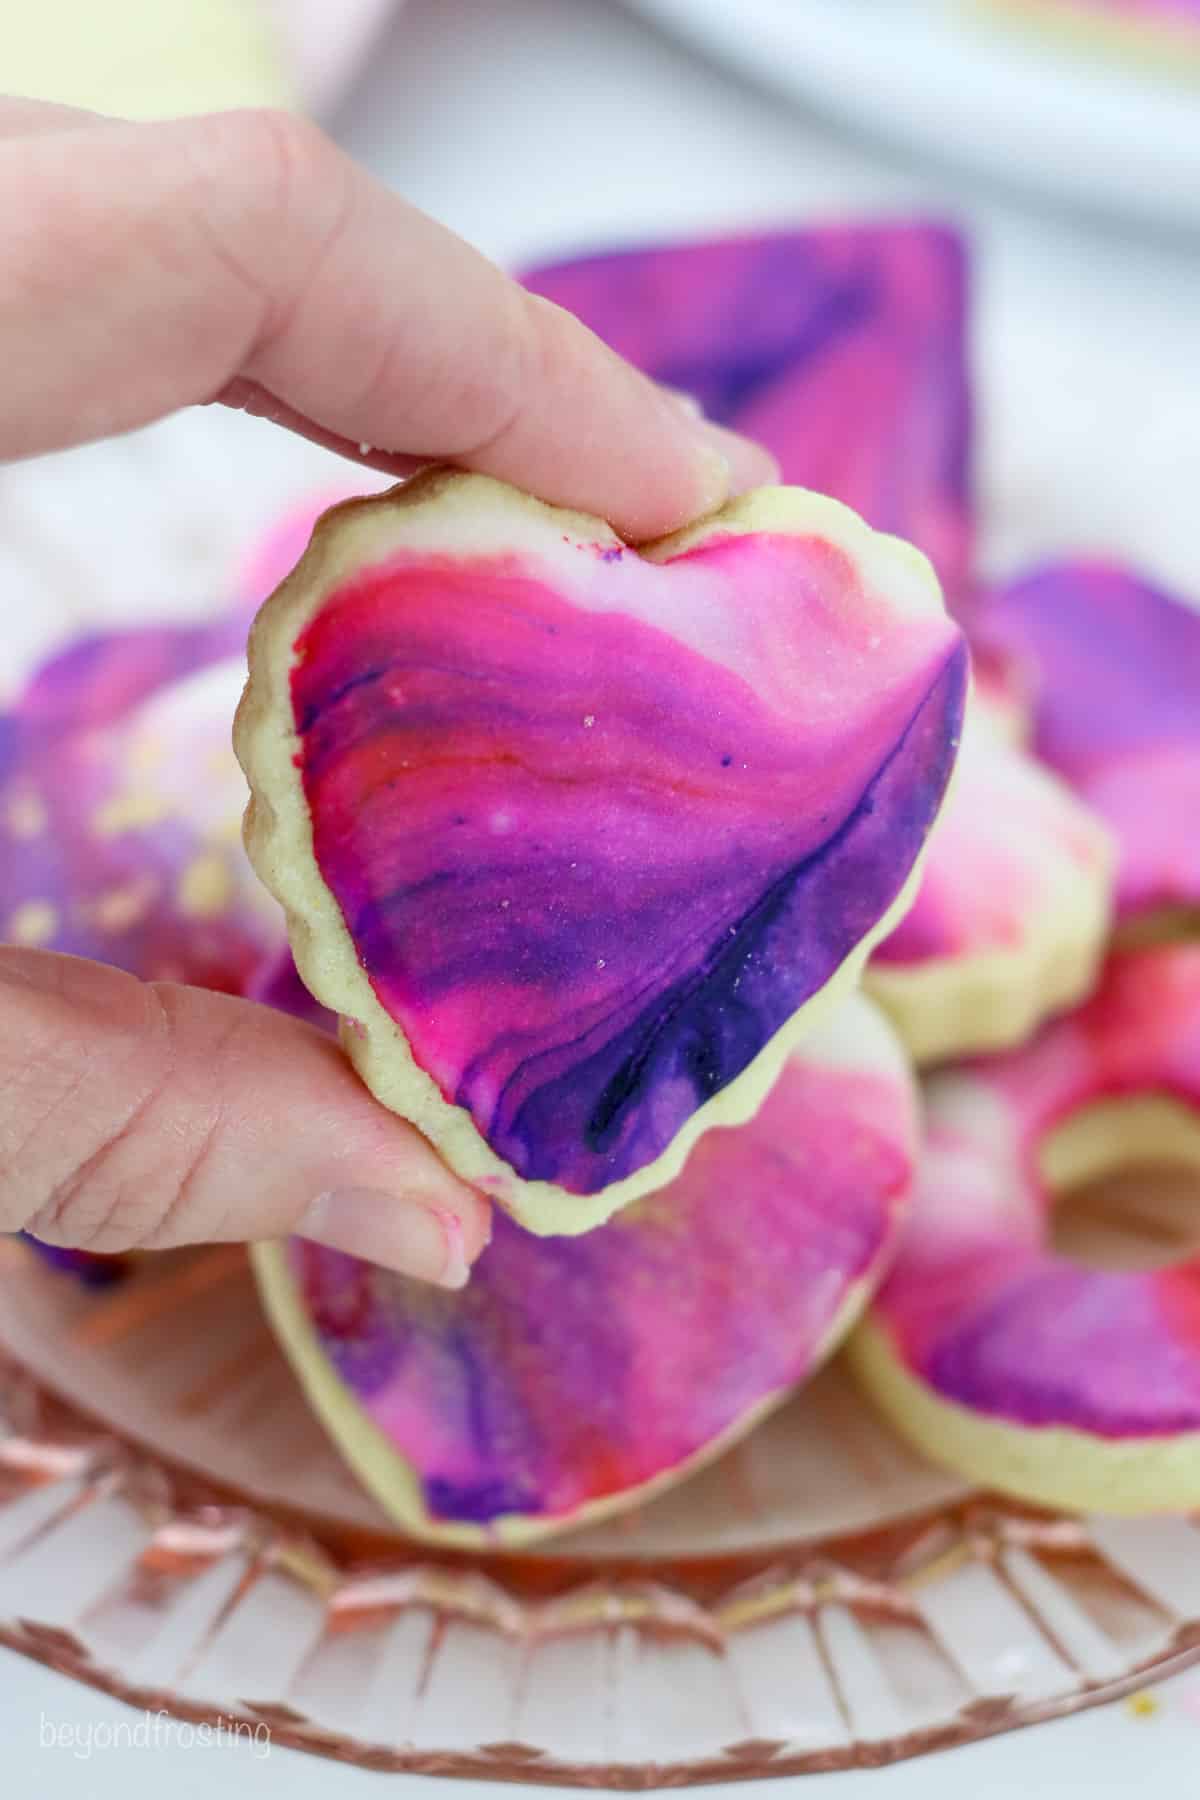 A hand holding an iced heart-shaped cookie over more Valentine's Day cookies on a plate.